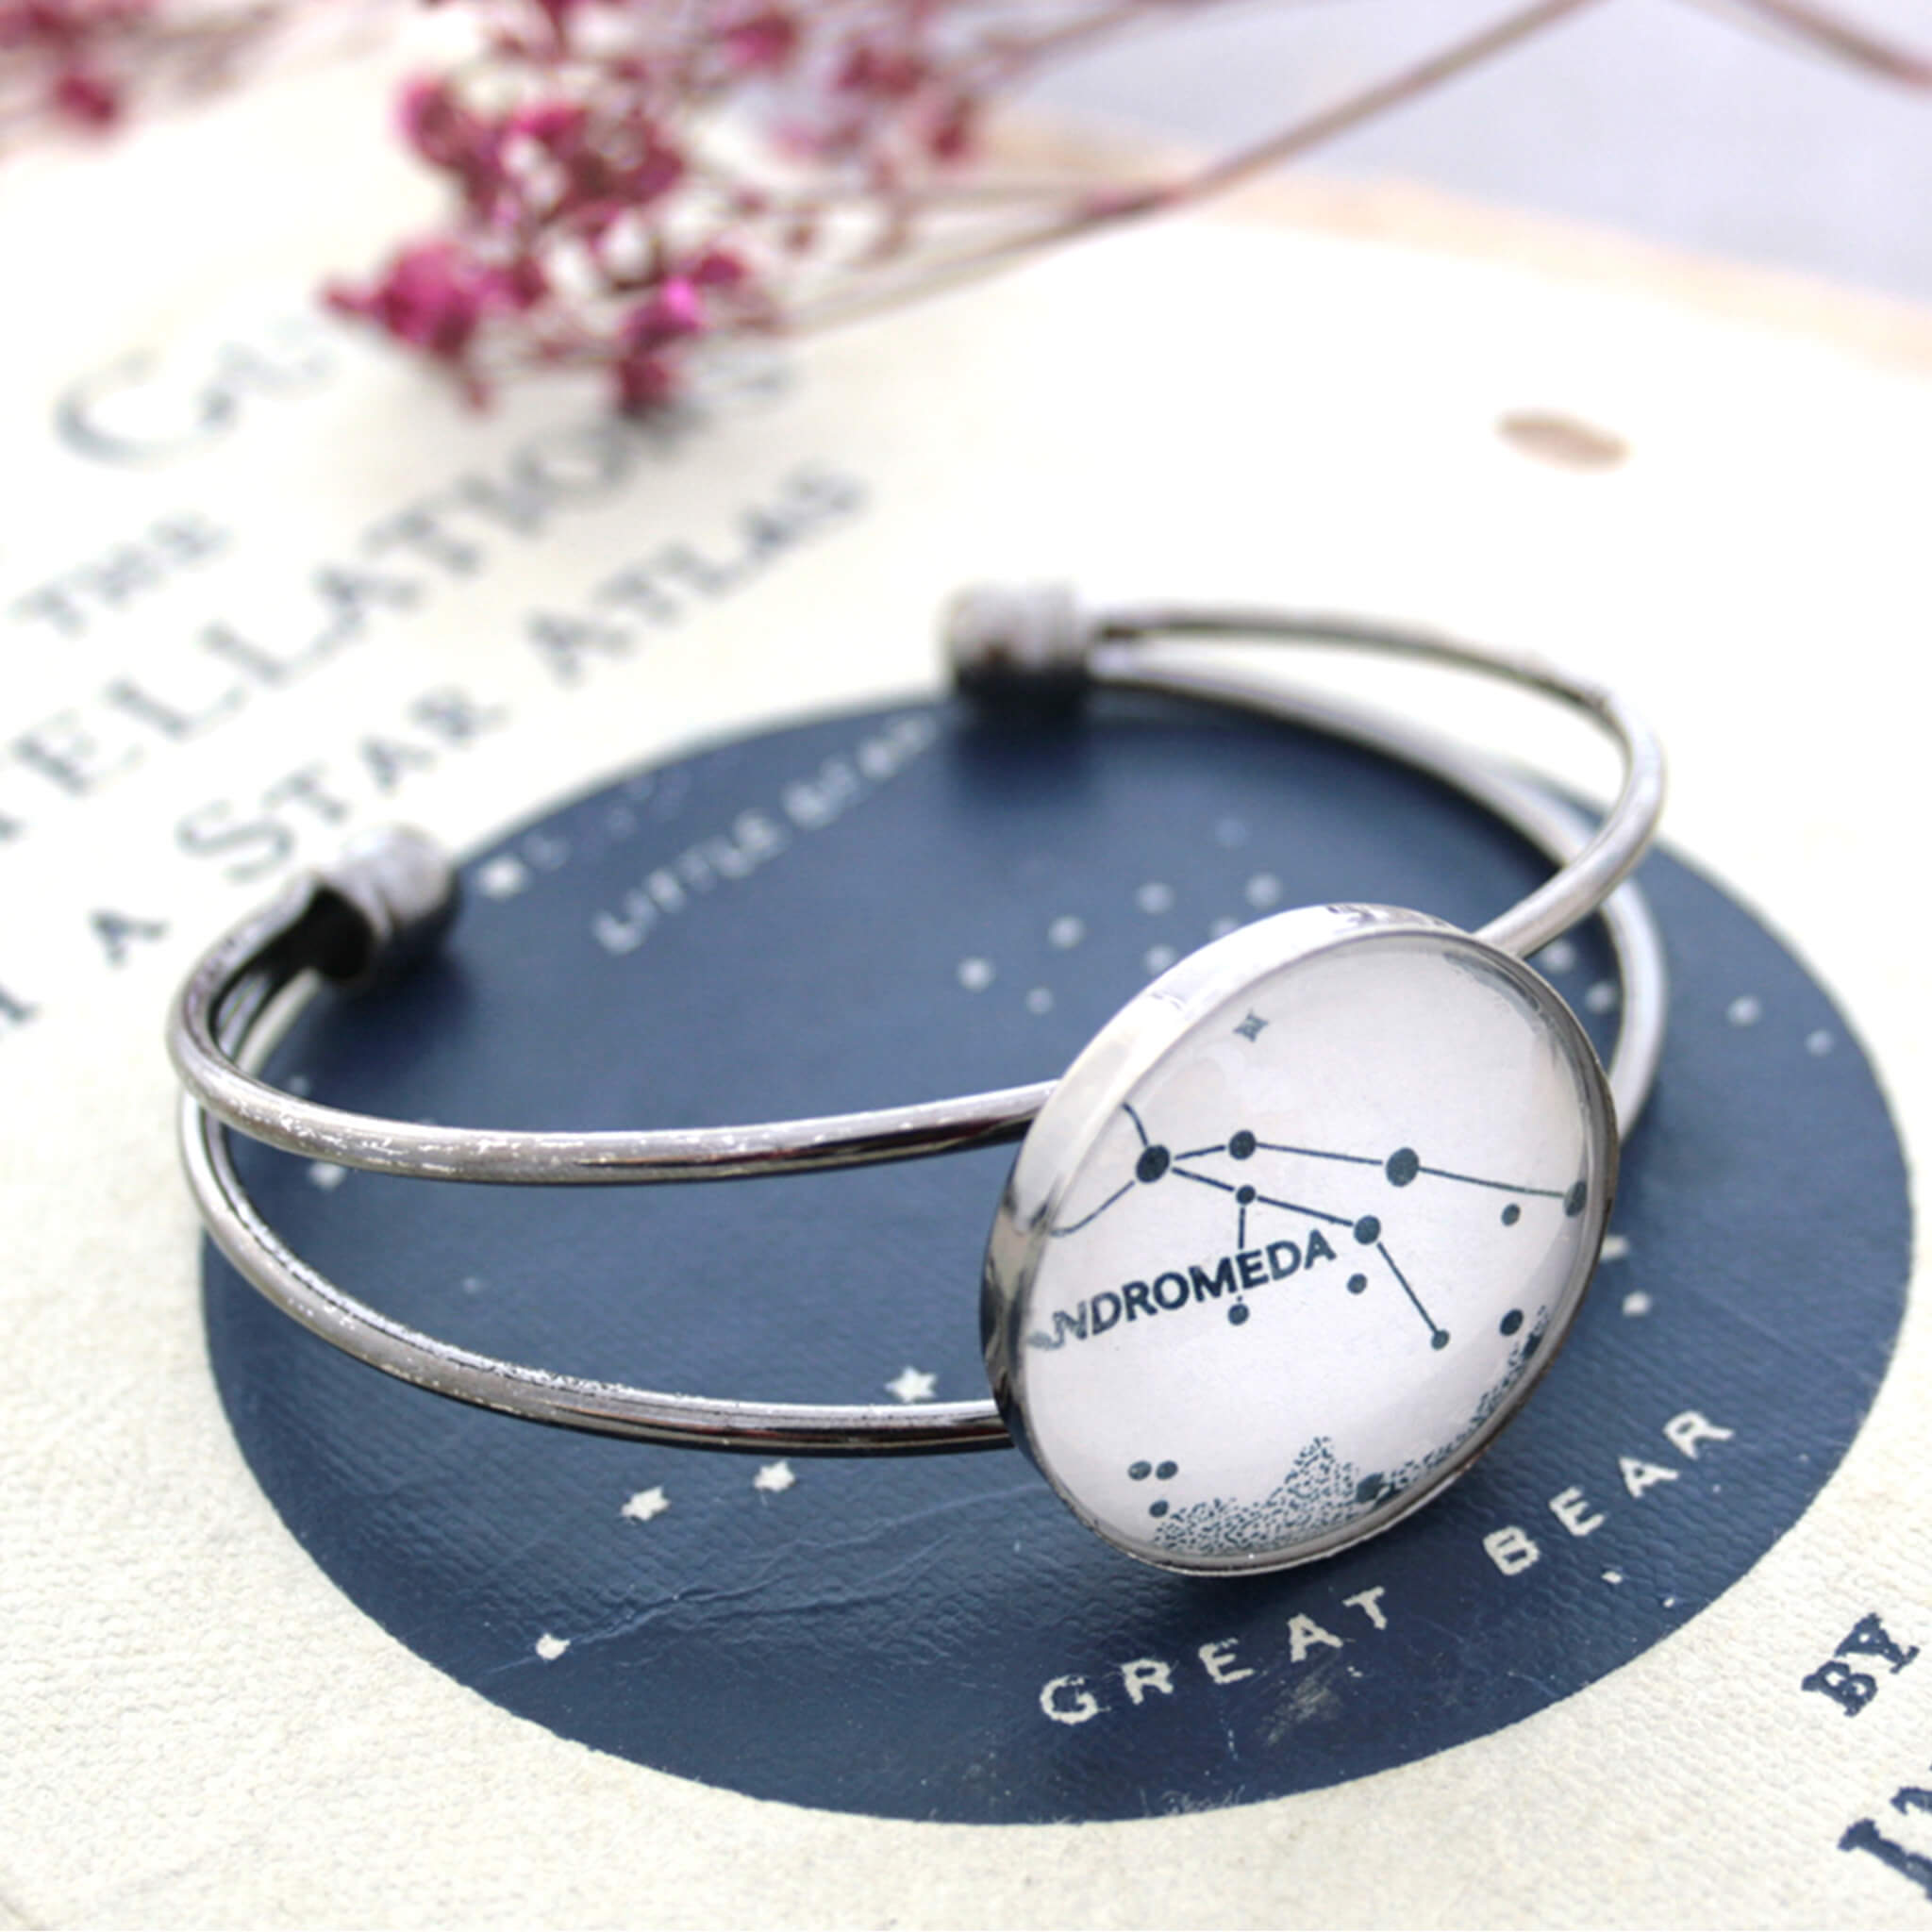 Gunmetal bangle bracelet featuring heavens map with Andromeda constellation